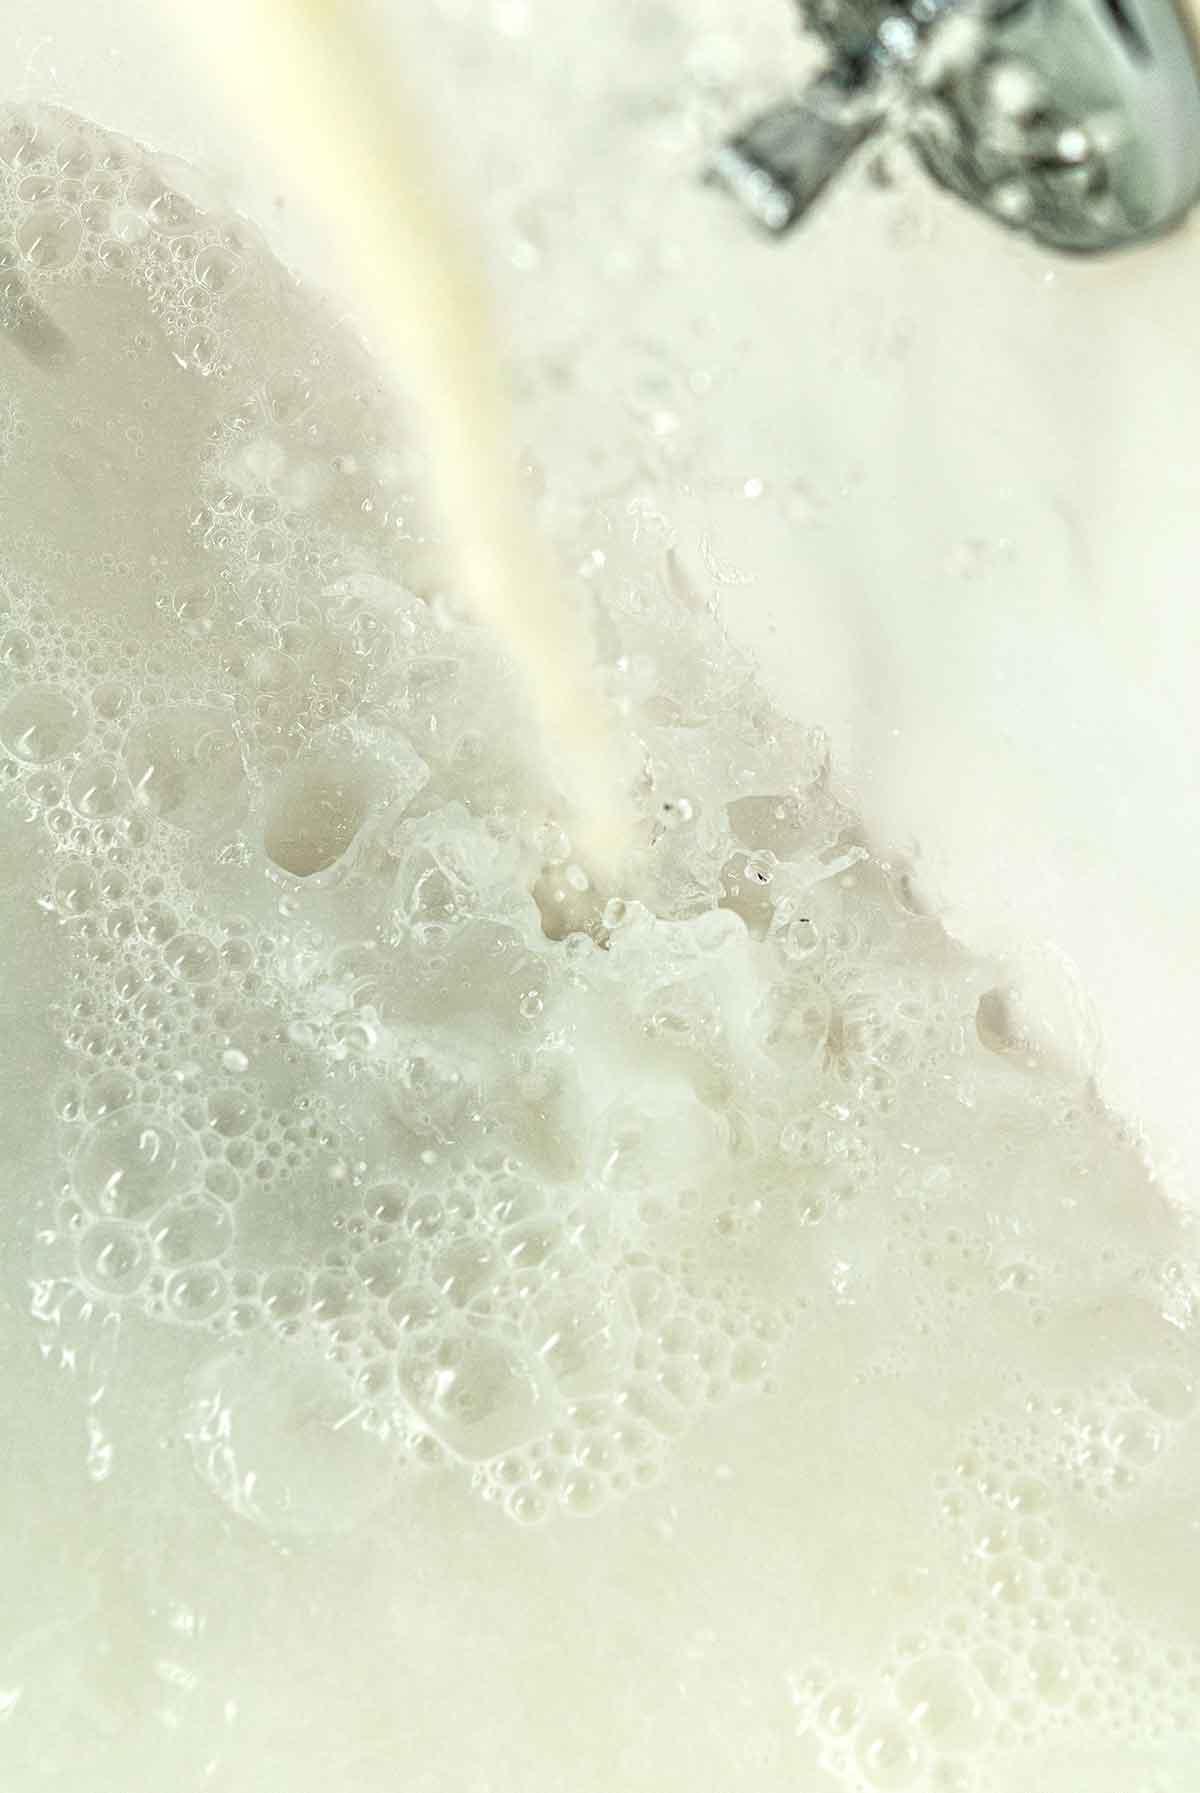 Powdered milk pouring into the stream of a running faucet in a bath tub.